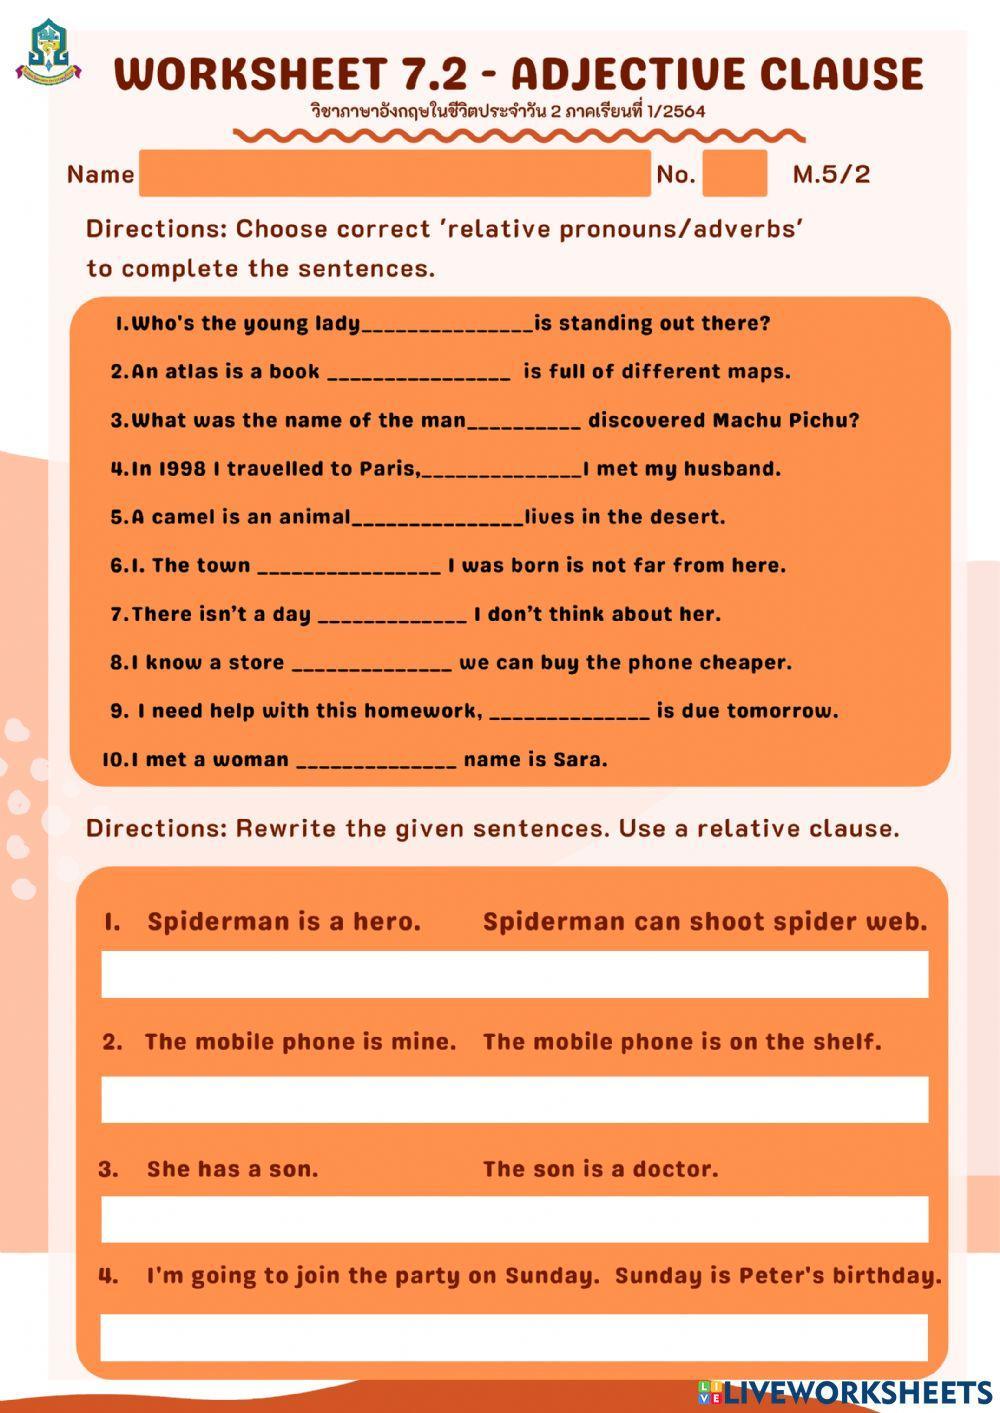 Worksheet 7.2 Adjective Clauses